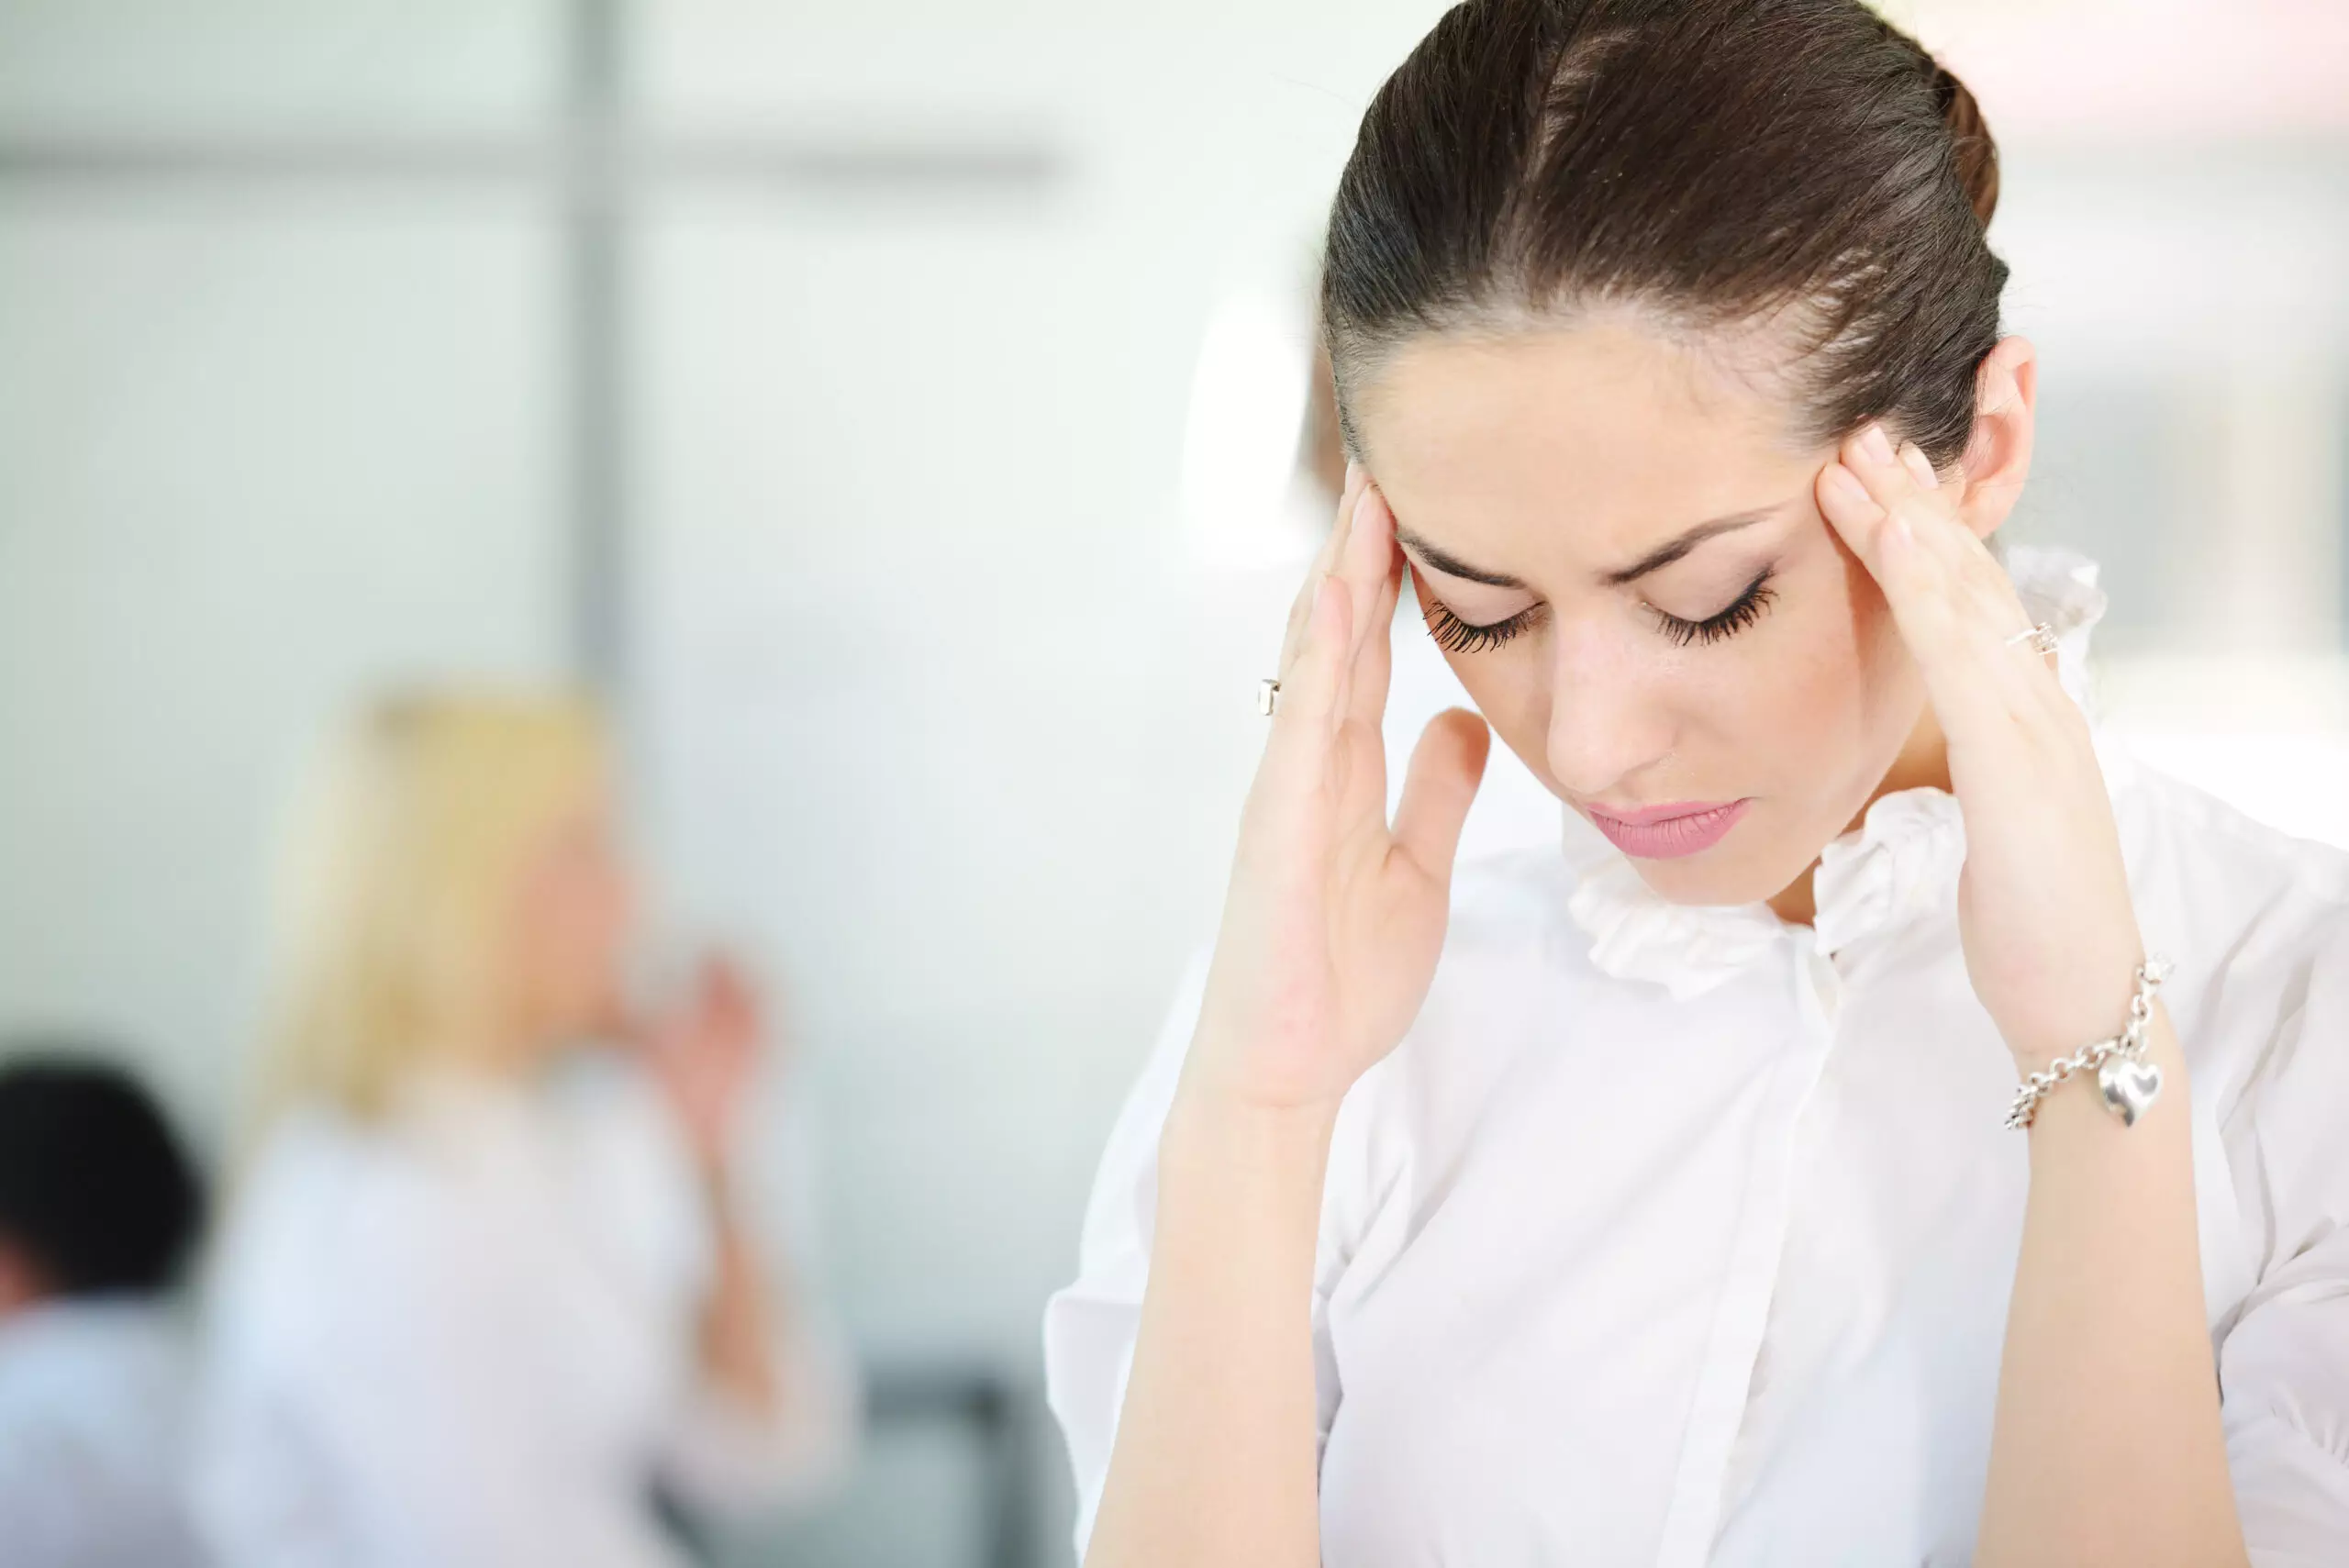 Woman with headache at work.